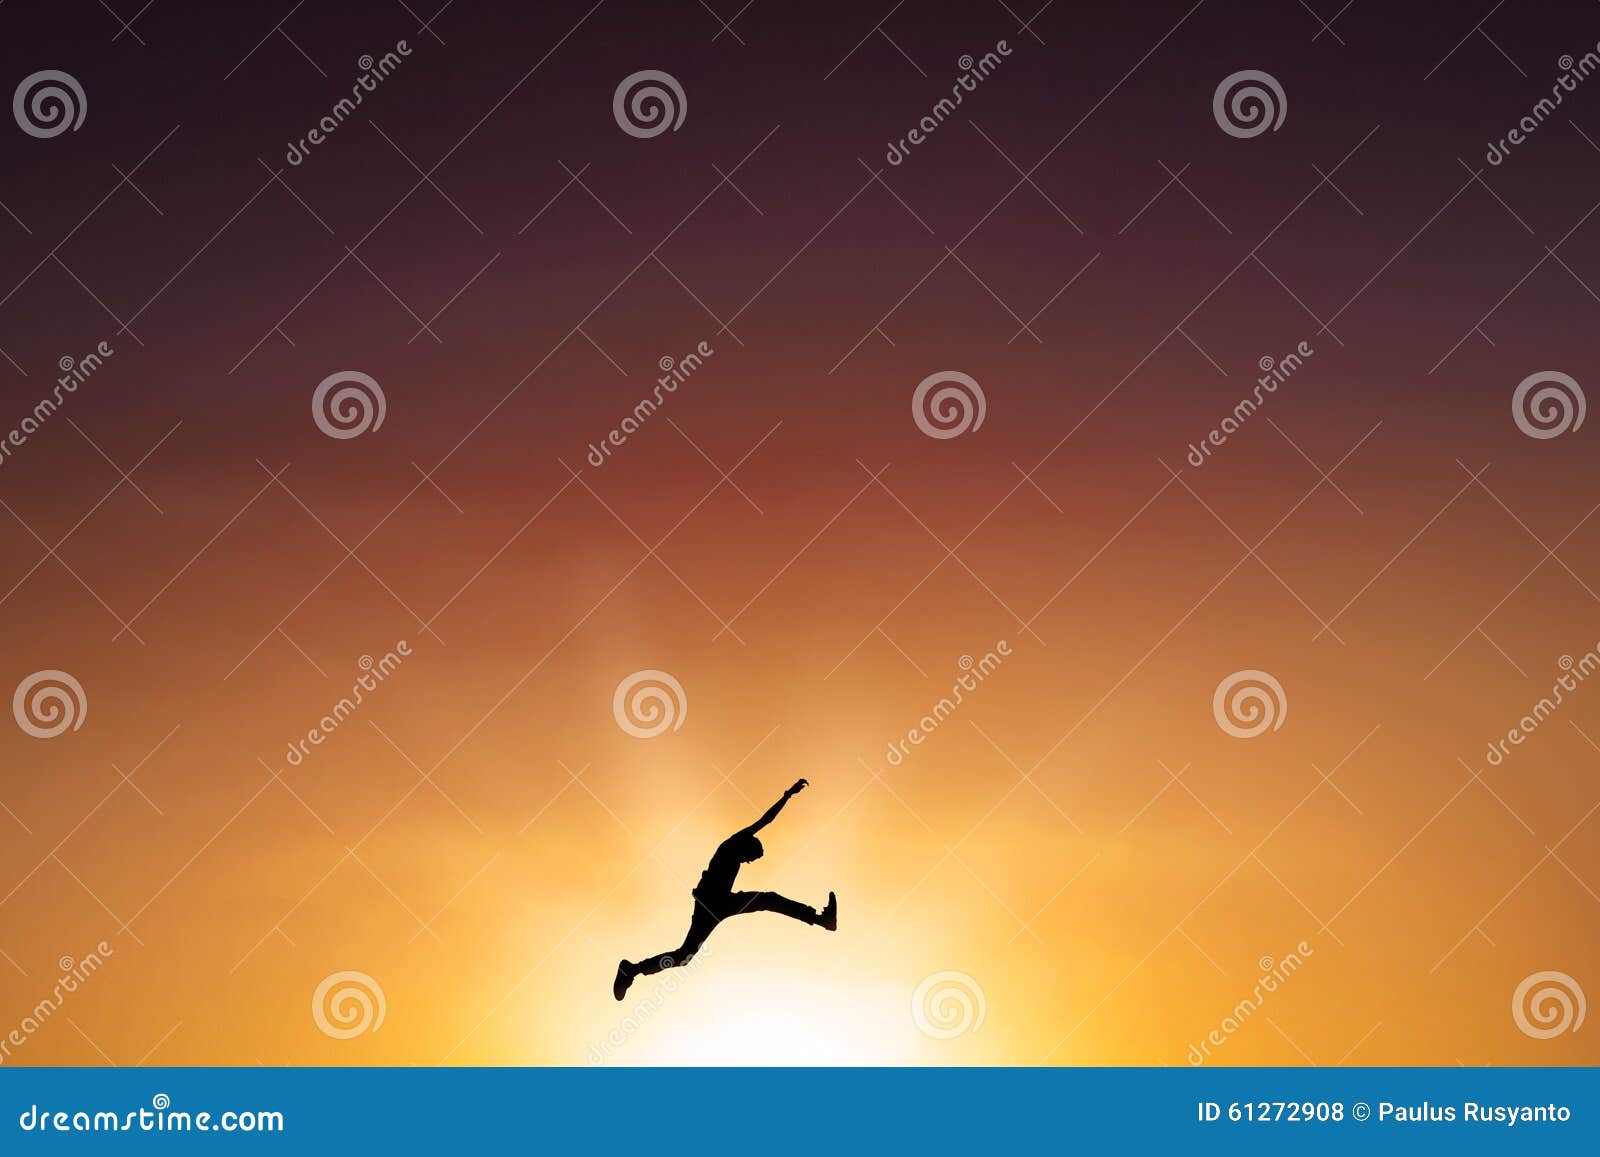 male person leaps on the air at dusk time